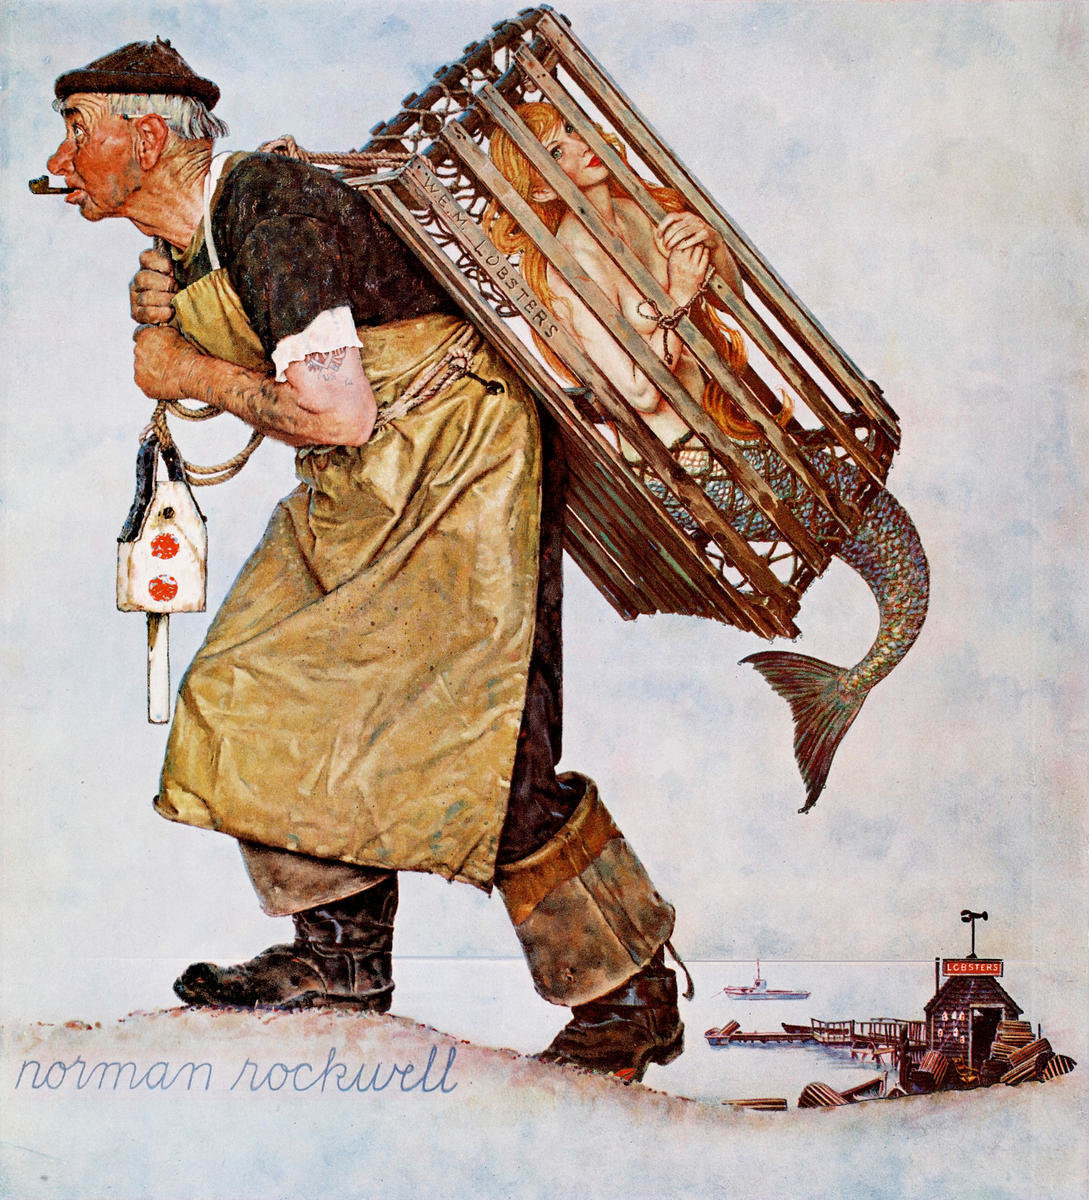  Norman Rockwell Art Poster Print Fishing: Posters